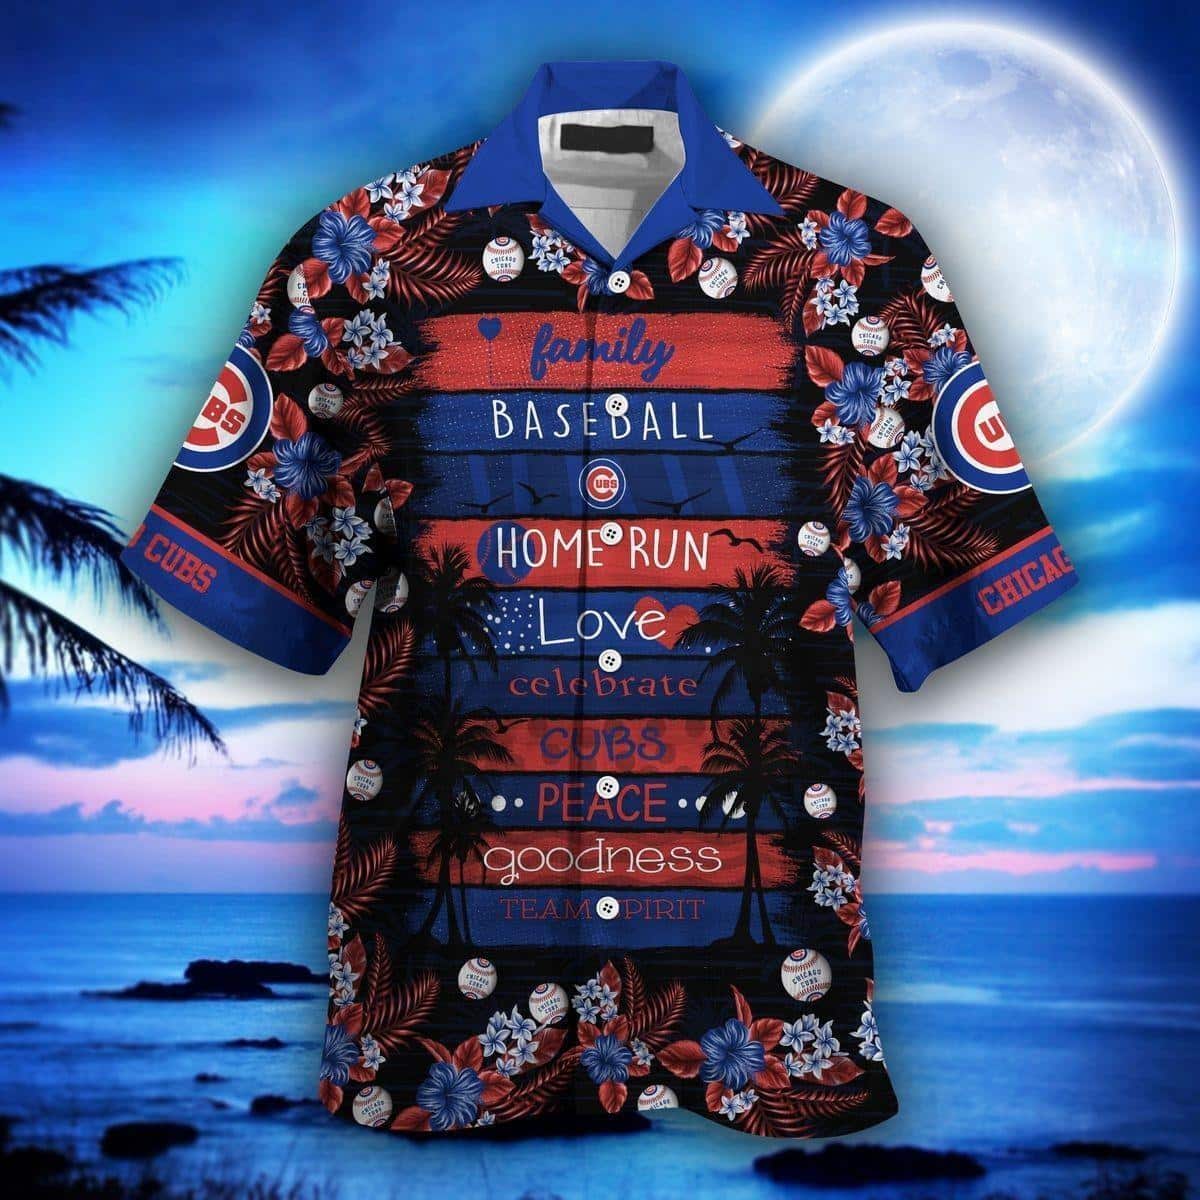 TRENDING] Chicago Cubs MLB-Personalized Hawaiian Shirt